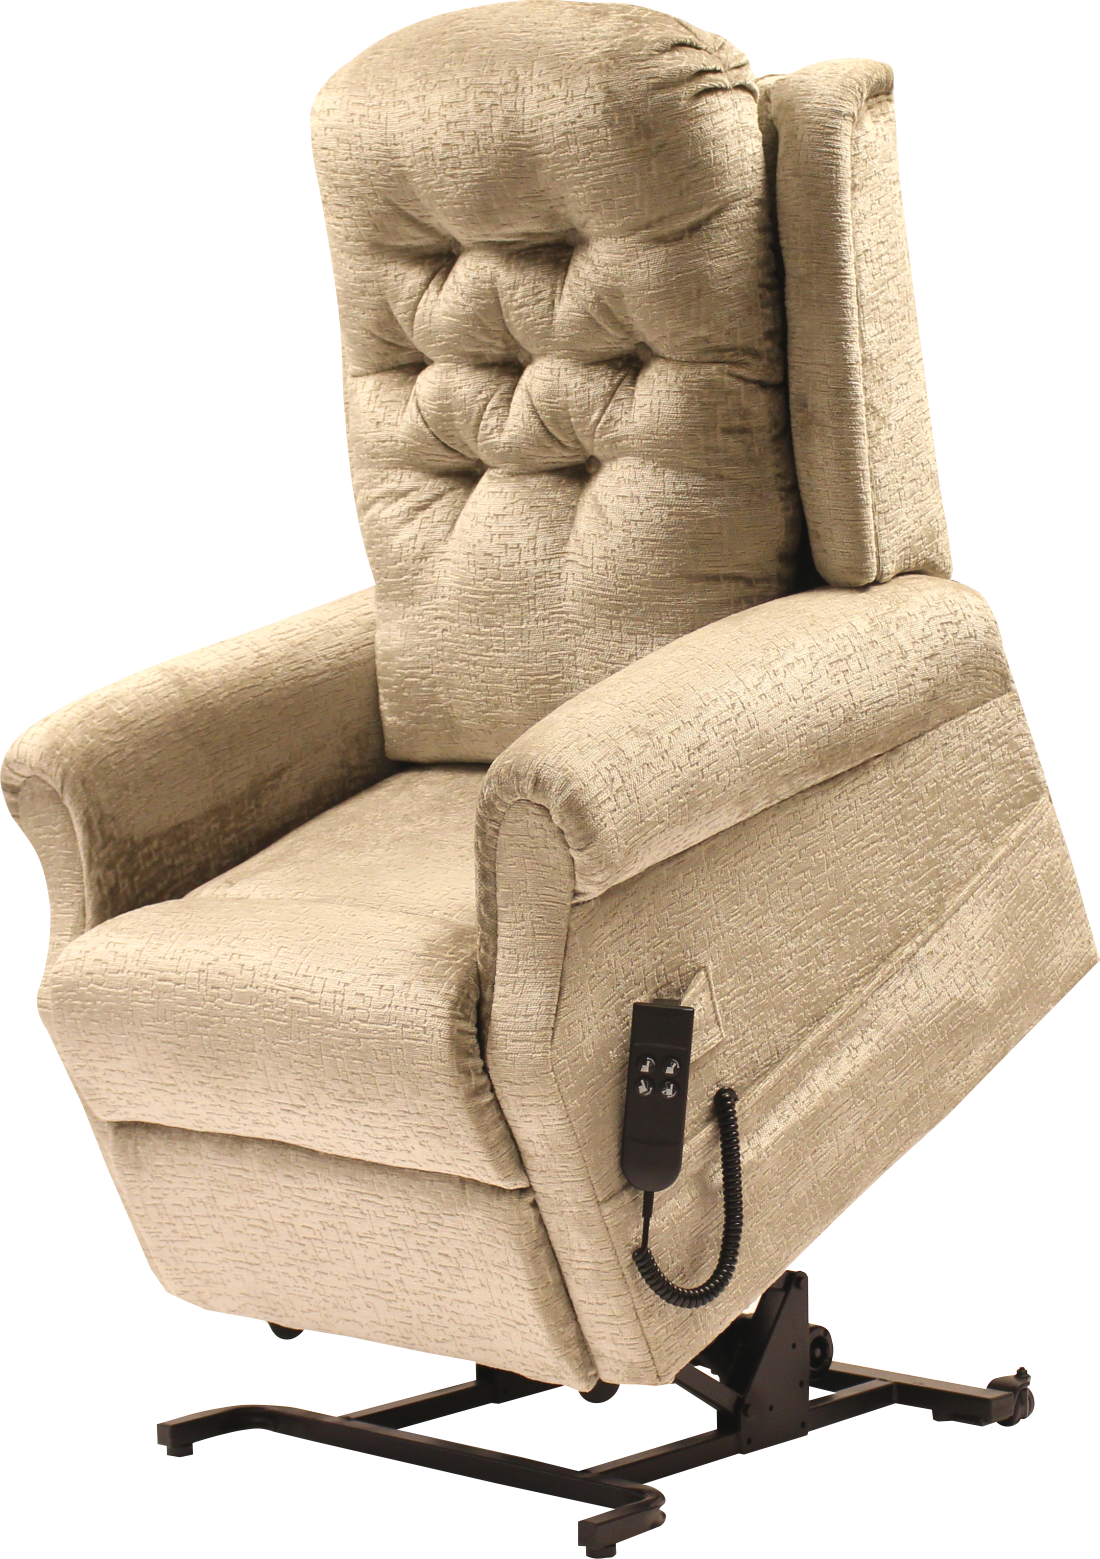 Buckholm Upholstered Lift & Rise Recliner Arm Chair Petite